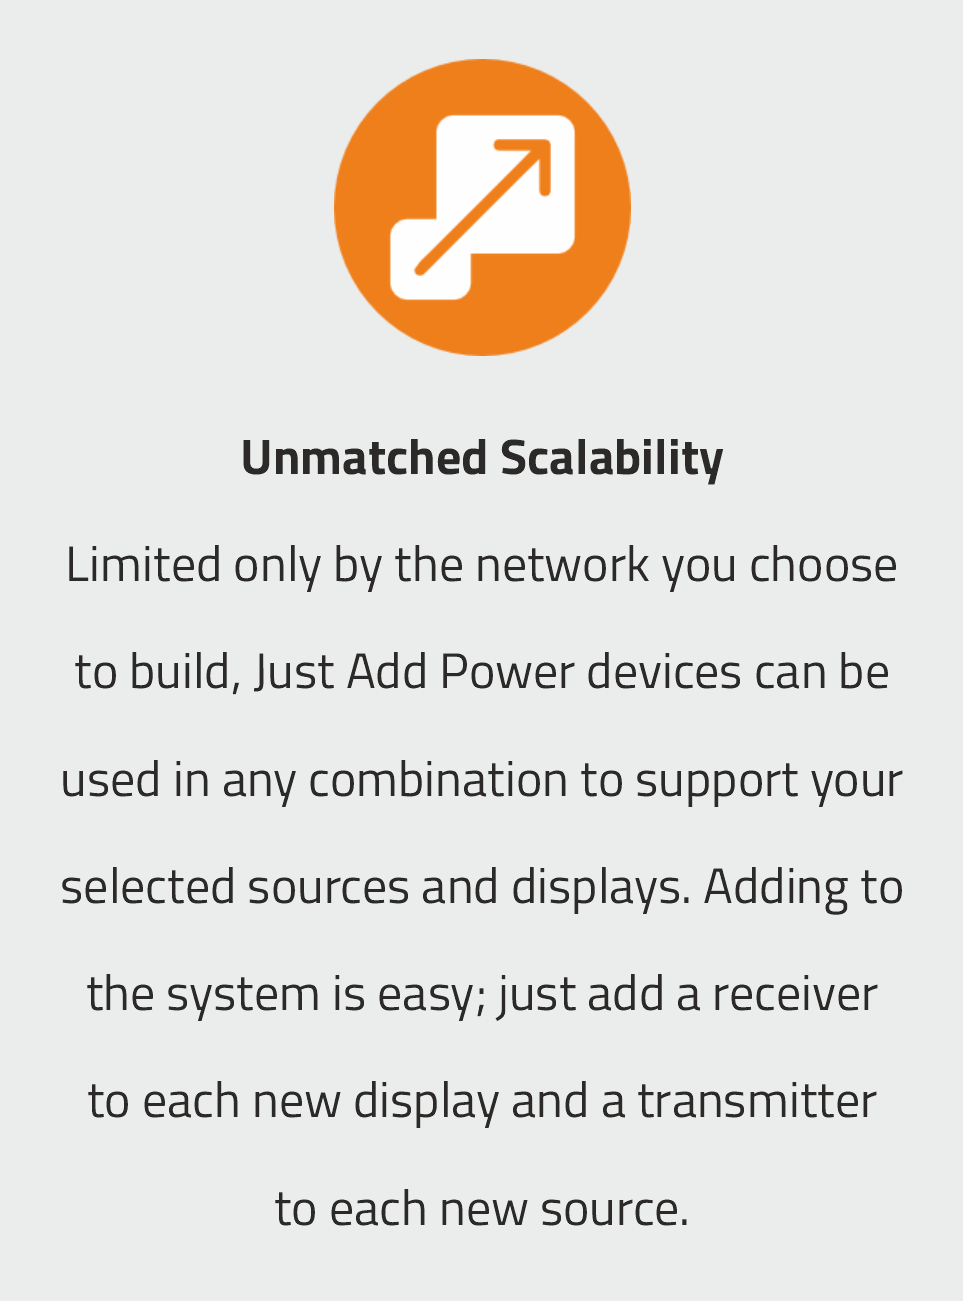 Unmatched Scalability